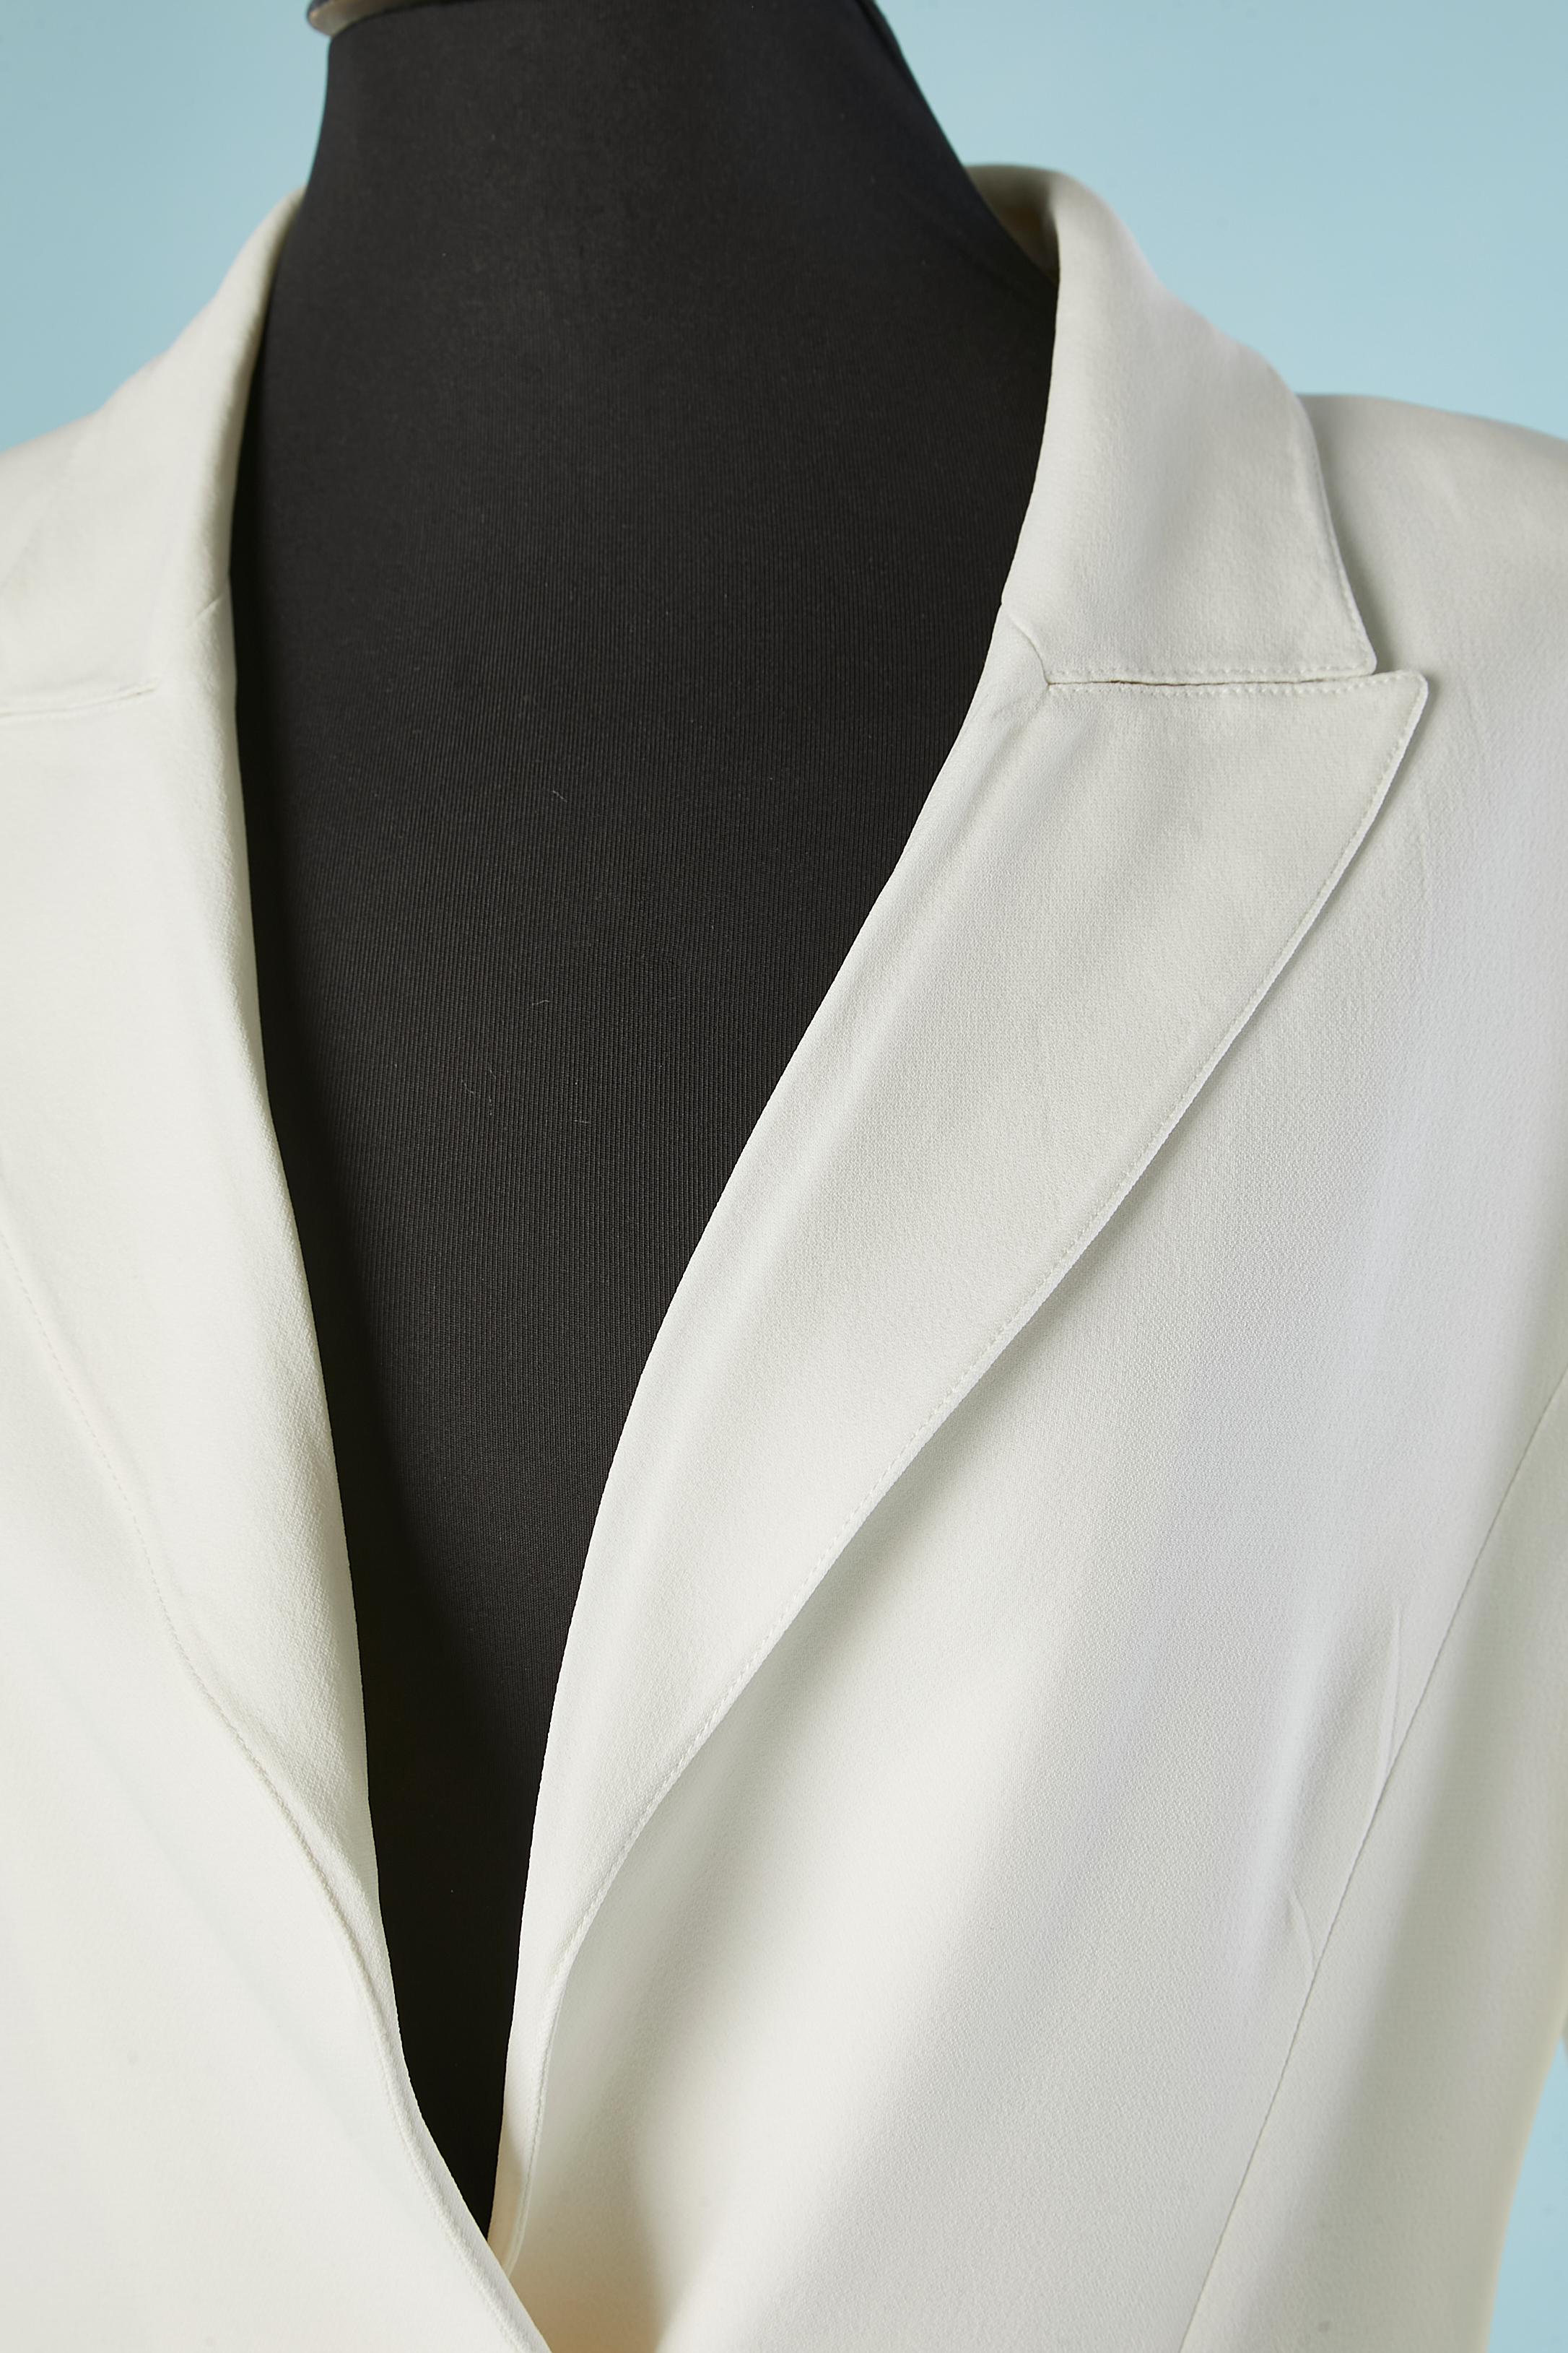 White crêpe trouser-suit . Single breasted jacket close with one mother-of-shell button. Shoulder pad; Split on both side, lenght= 27 cm
Silk lining. 
Size of the jacket= 42 (It) 8 (US) 
Size of the trouser= 40(It) 6 (Us) 